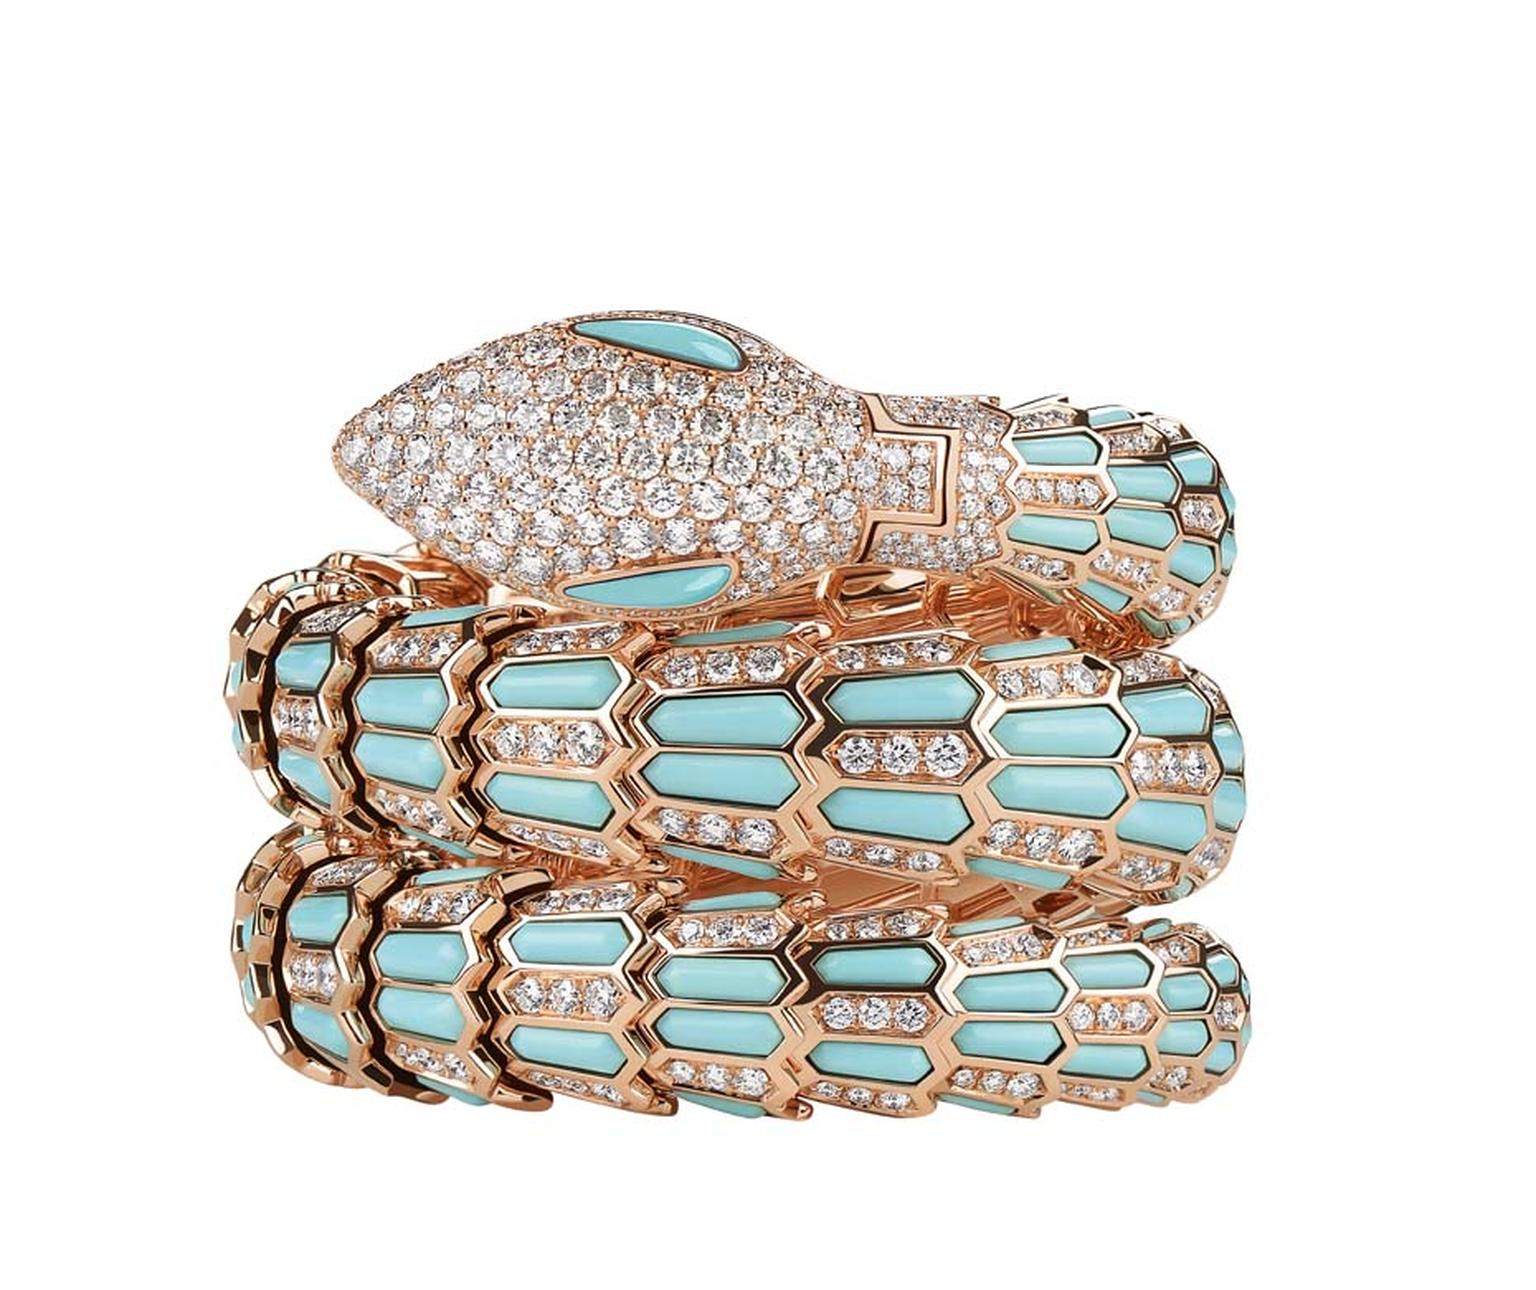 Bulgari Serpenti high jewellery snake watch in rose gold with diamonds and turquoise. Telegraph Time editor Caragh McKay, curator of the exhibition, describes the creativity, vision and skill currently seen in the world of high jewellery watch design as “